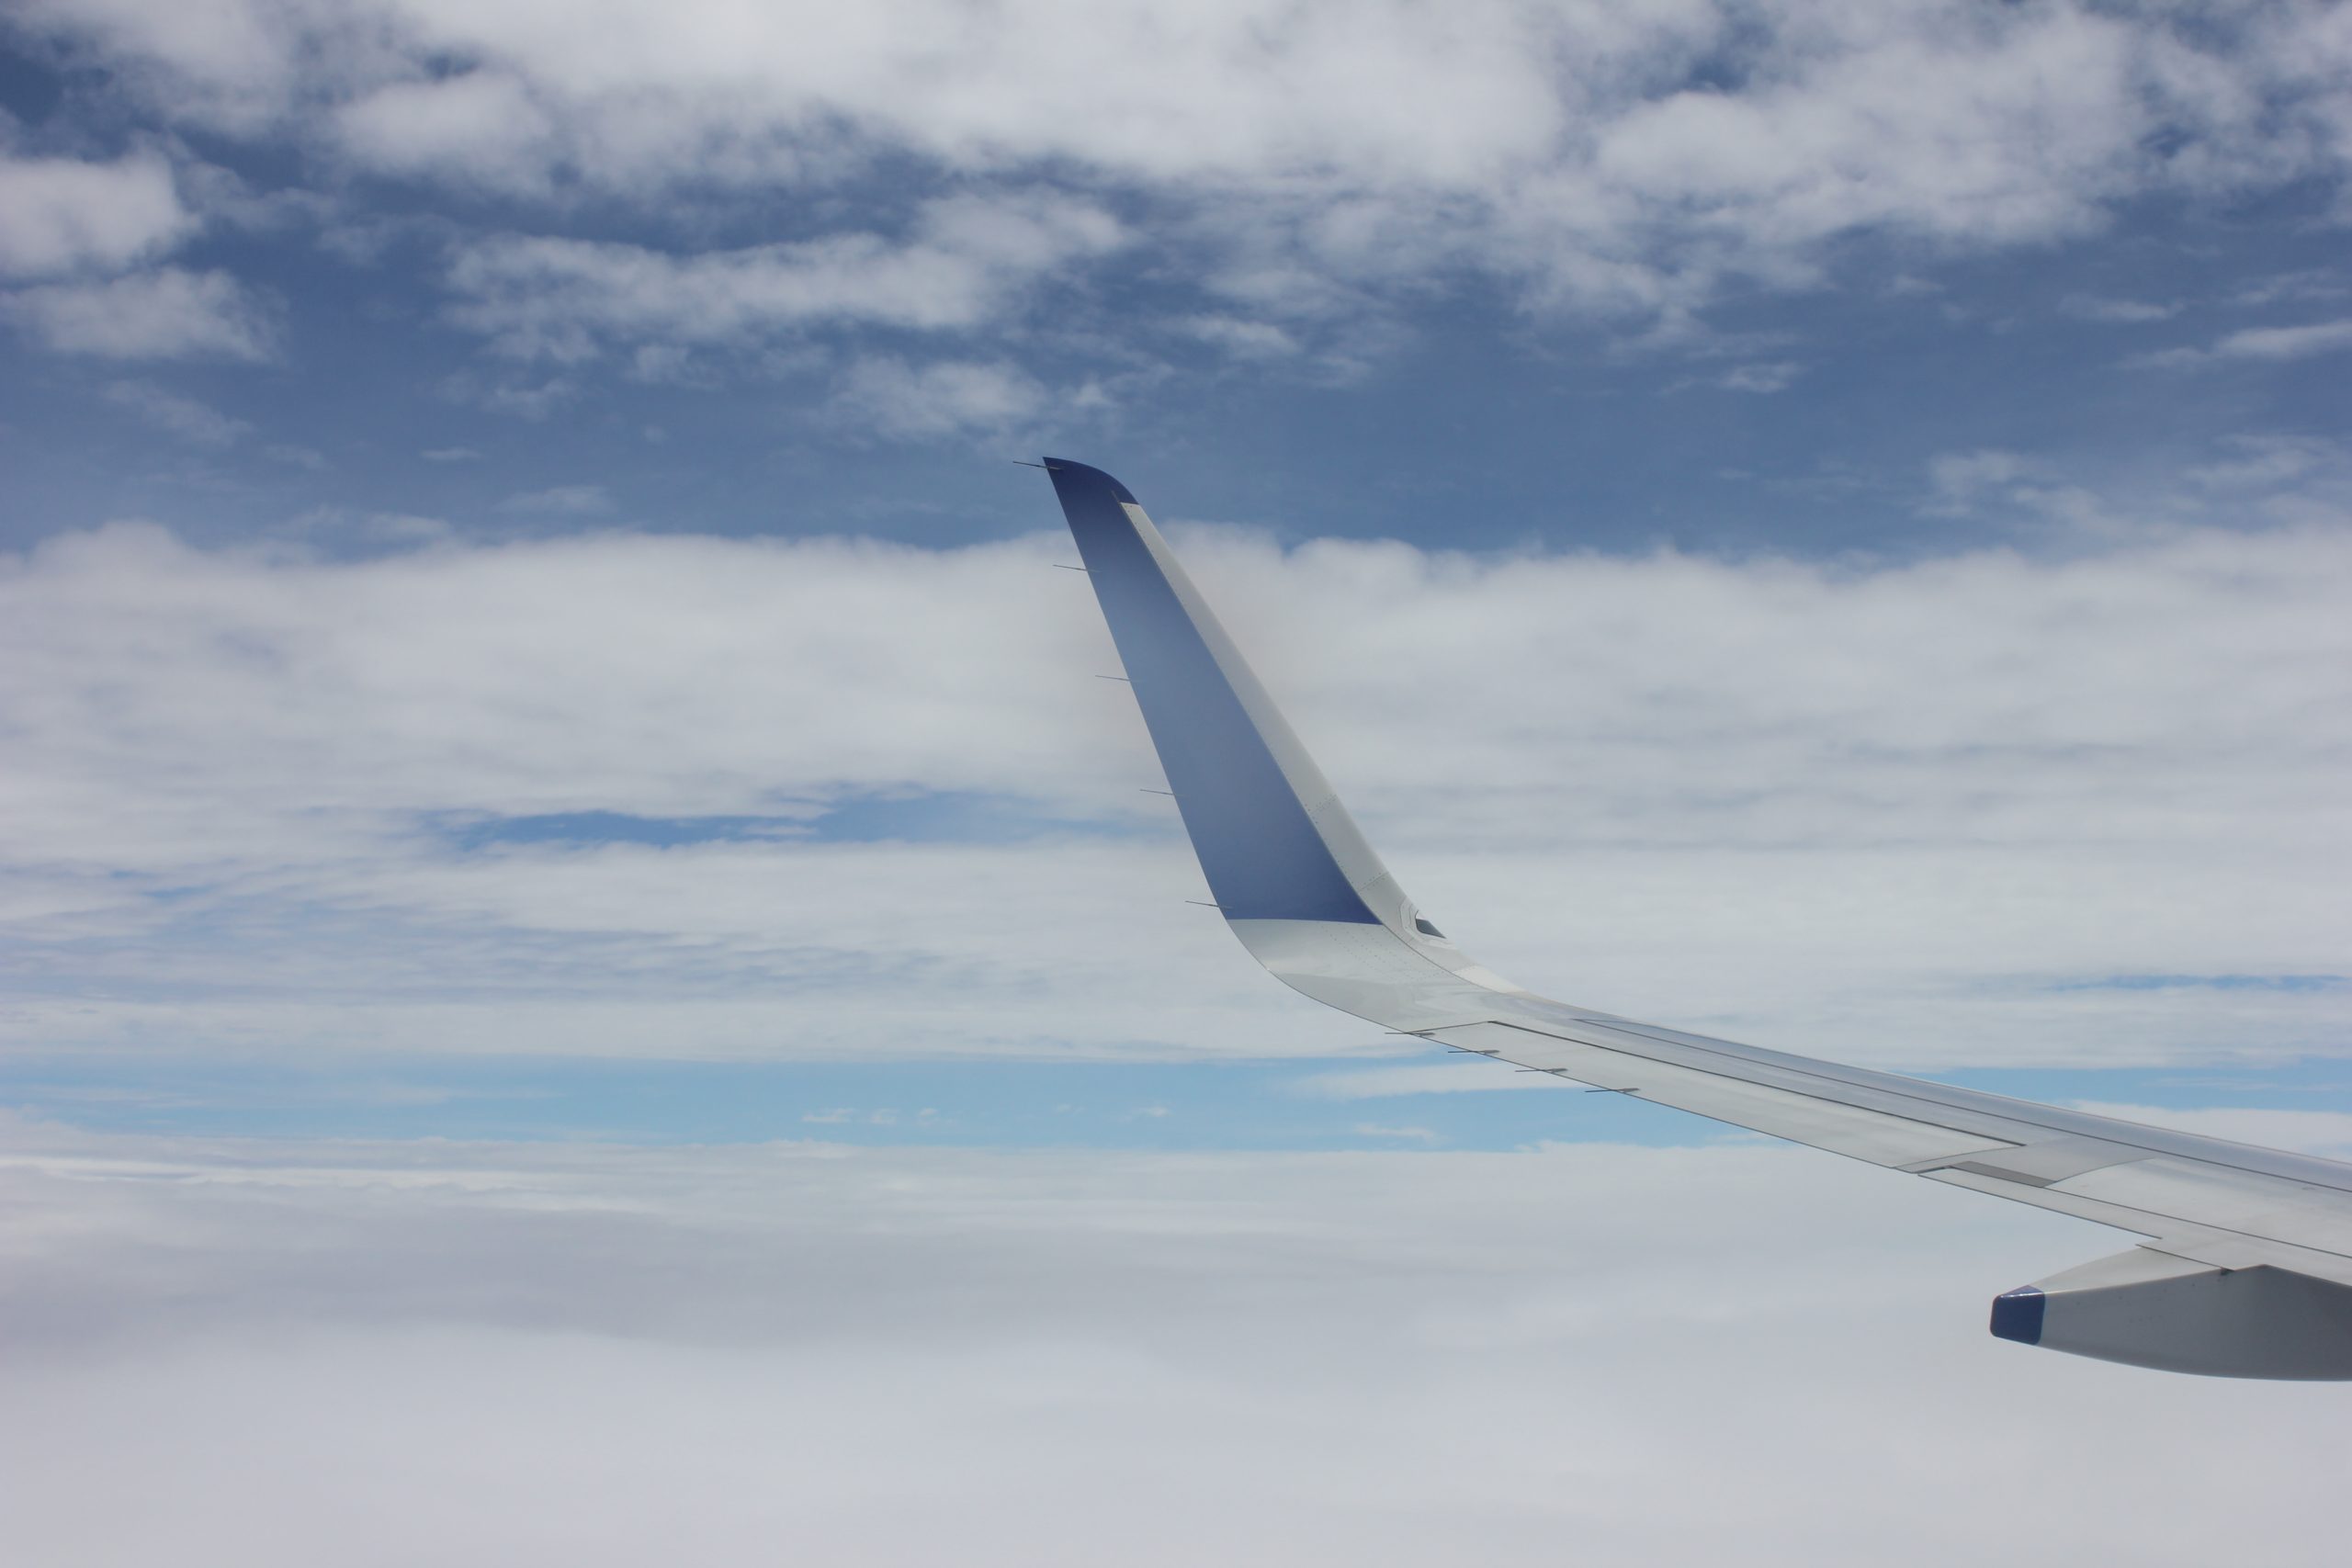 Wing tip of an aircraft